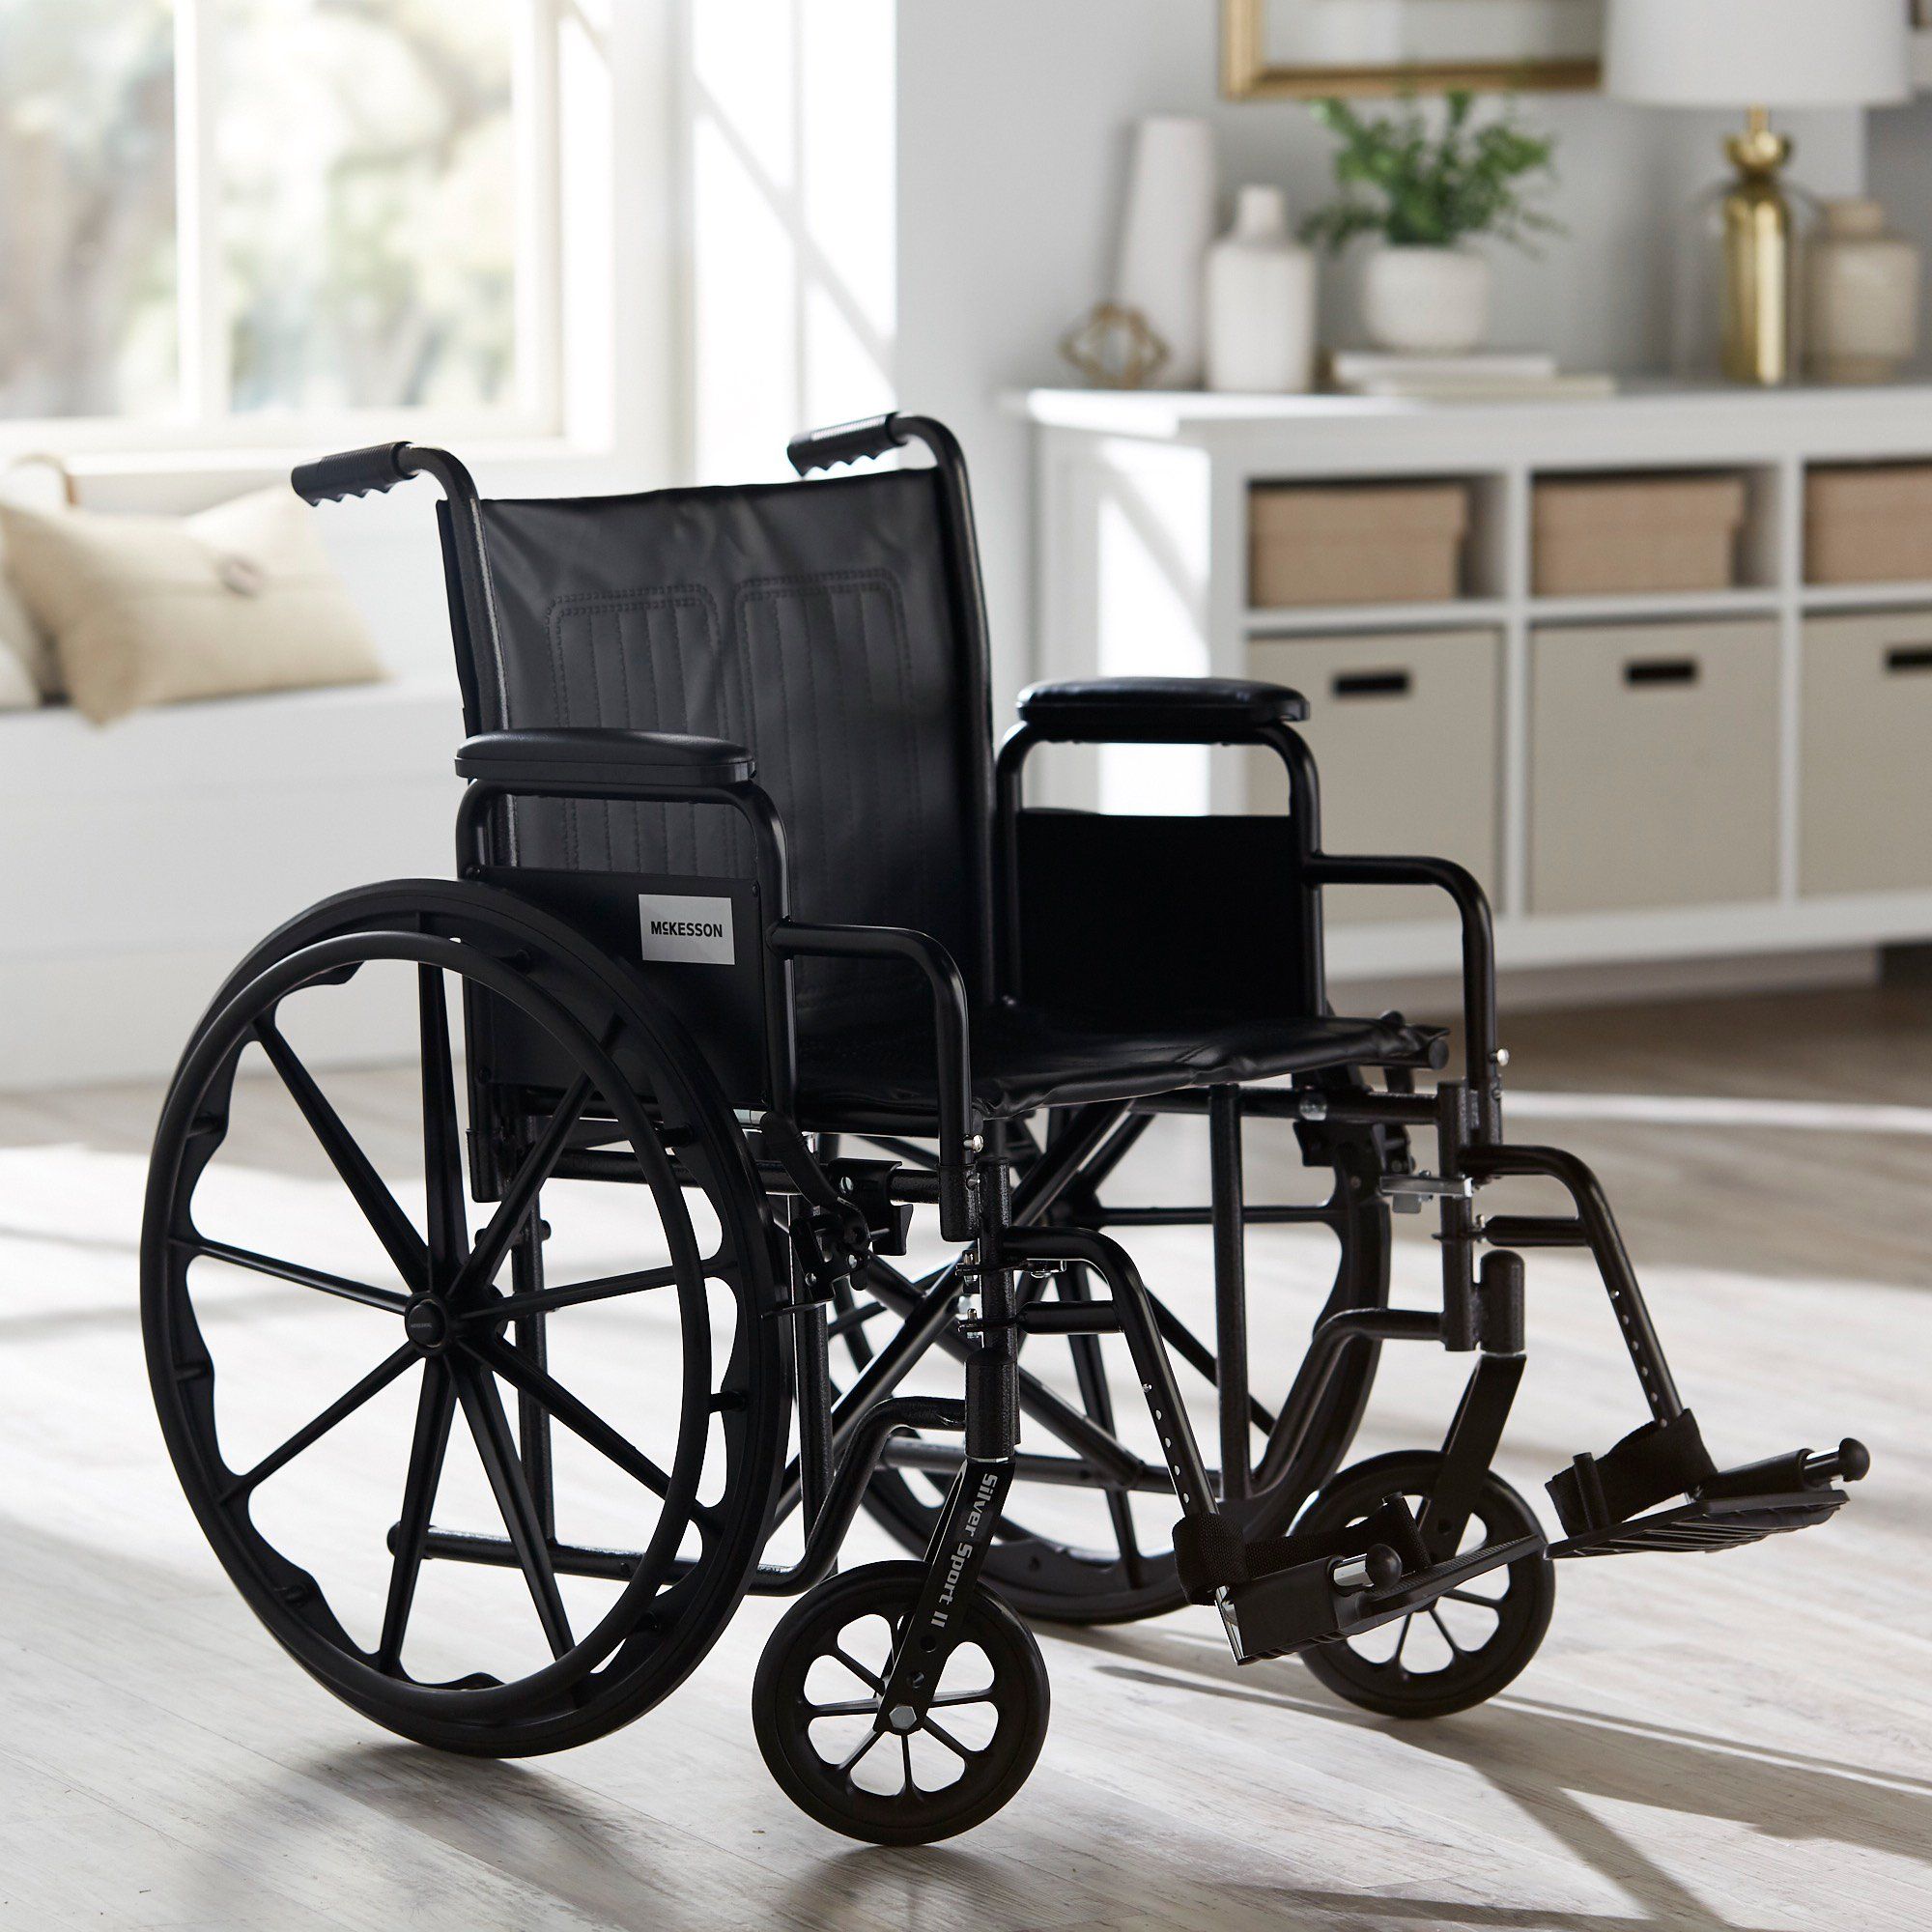 McKesson Wheelchair with Swing-Away Footrests & Detachable Arms - 350 lbs Weight Capacity